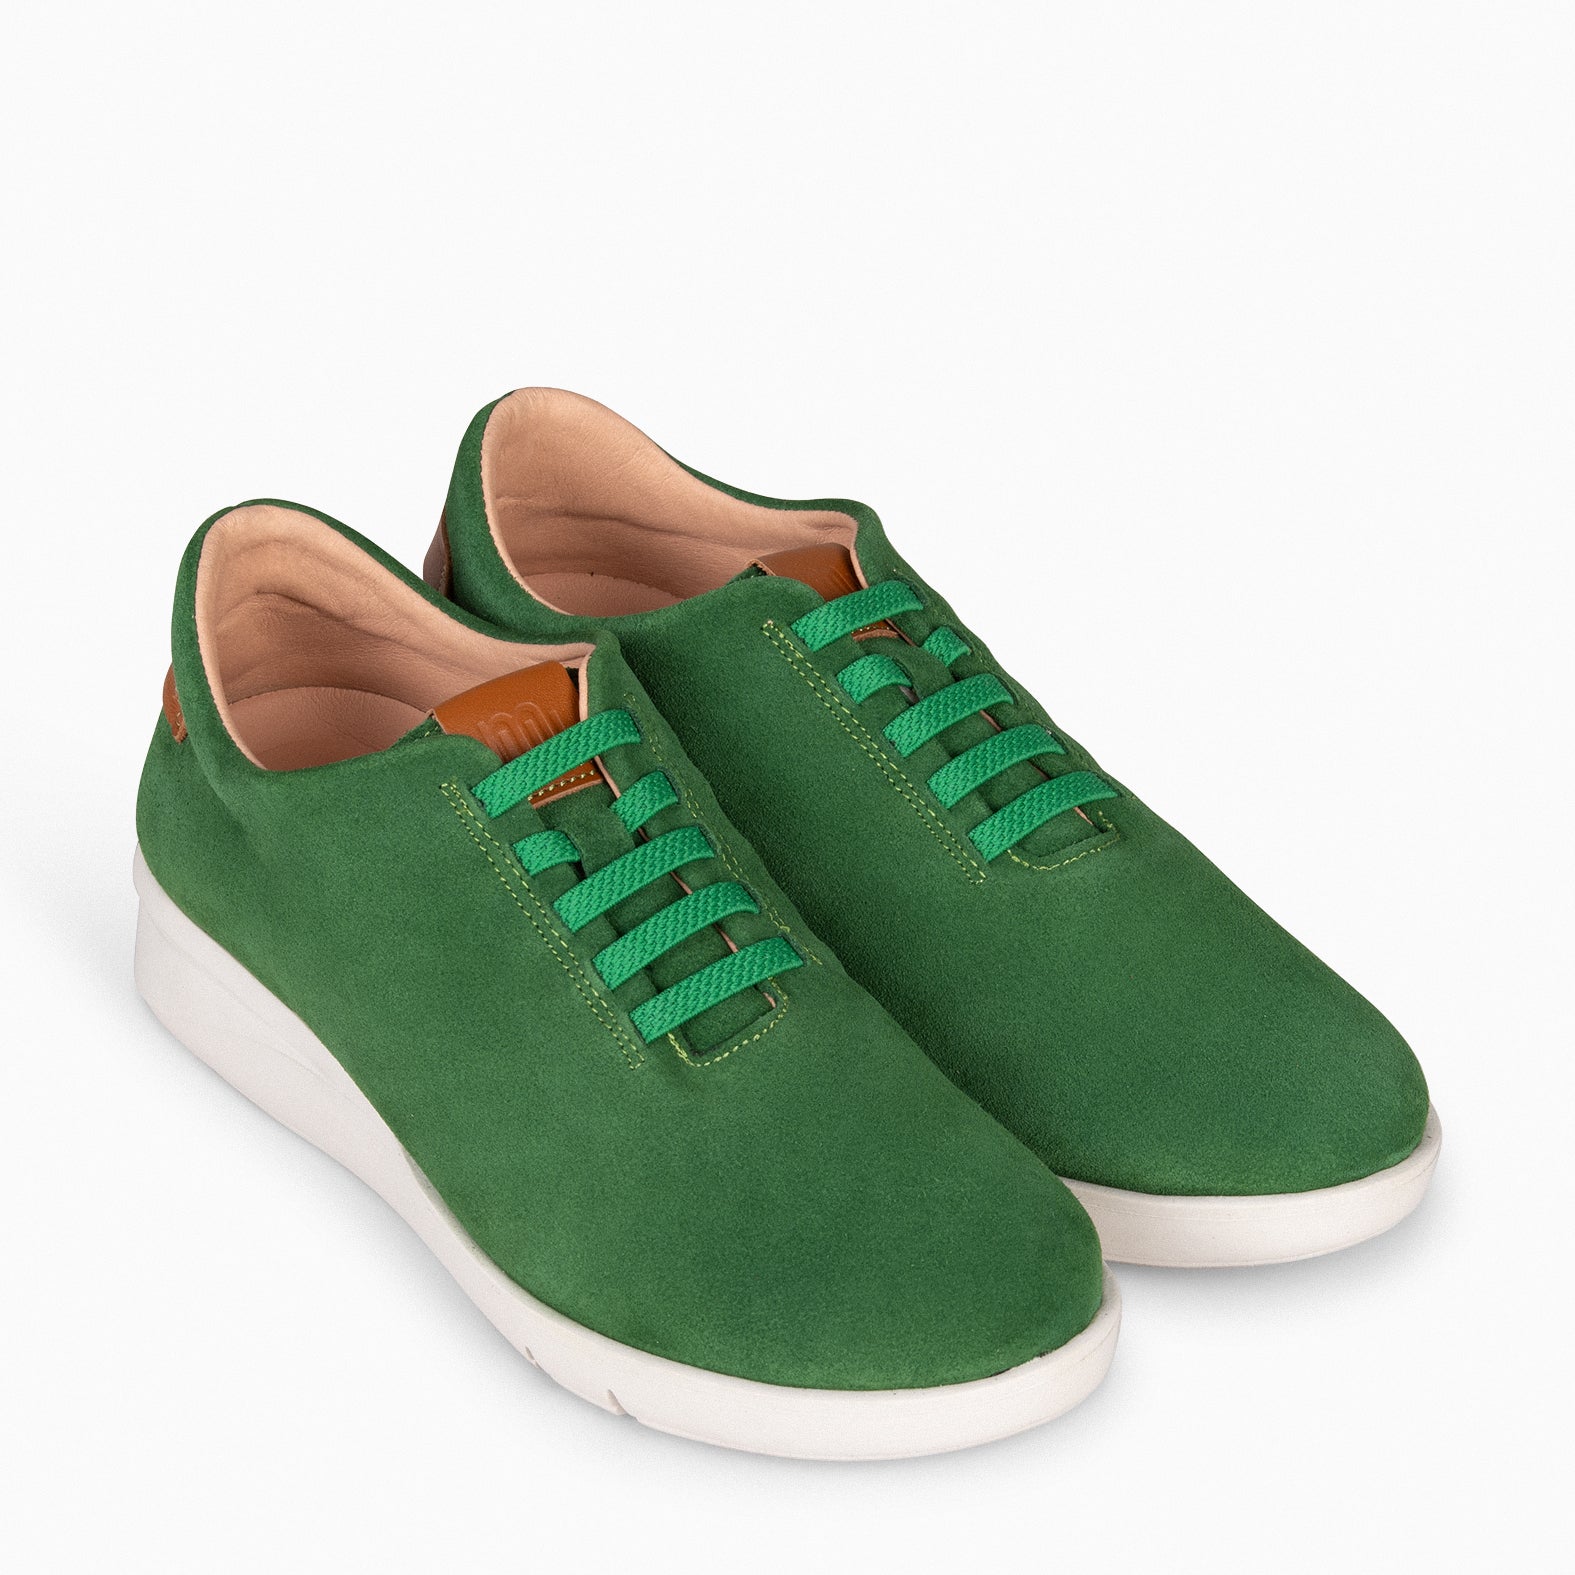 FLY – GREEN casual sneaker with elastic laces